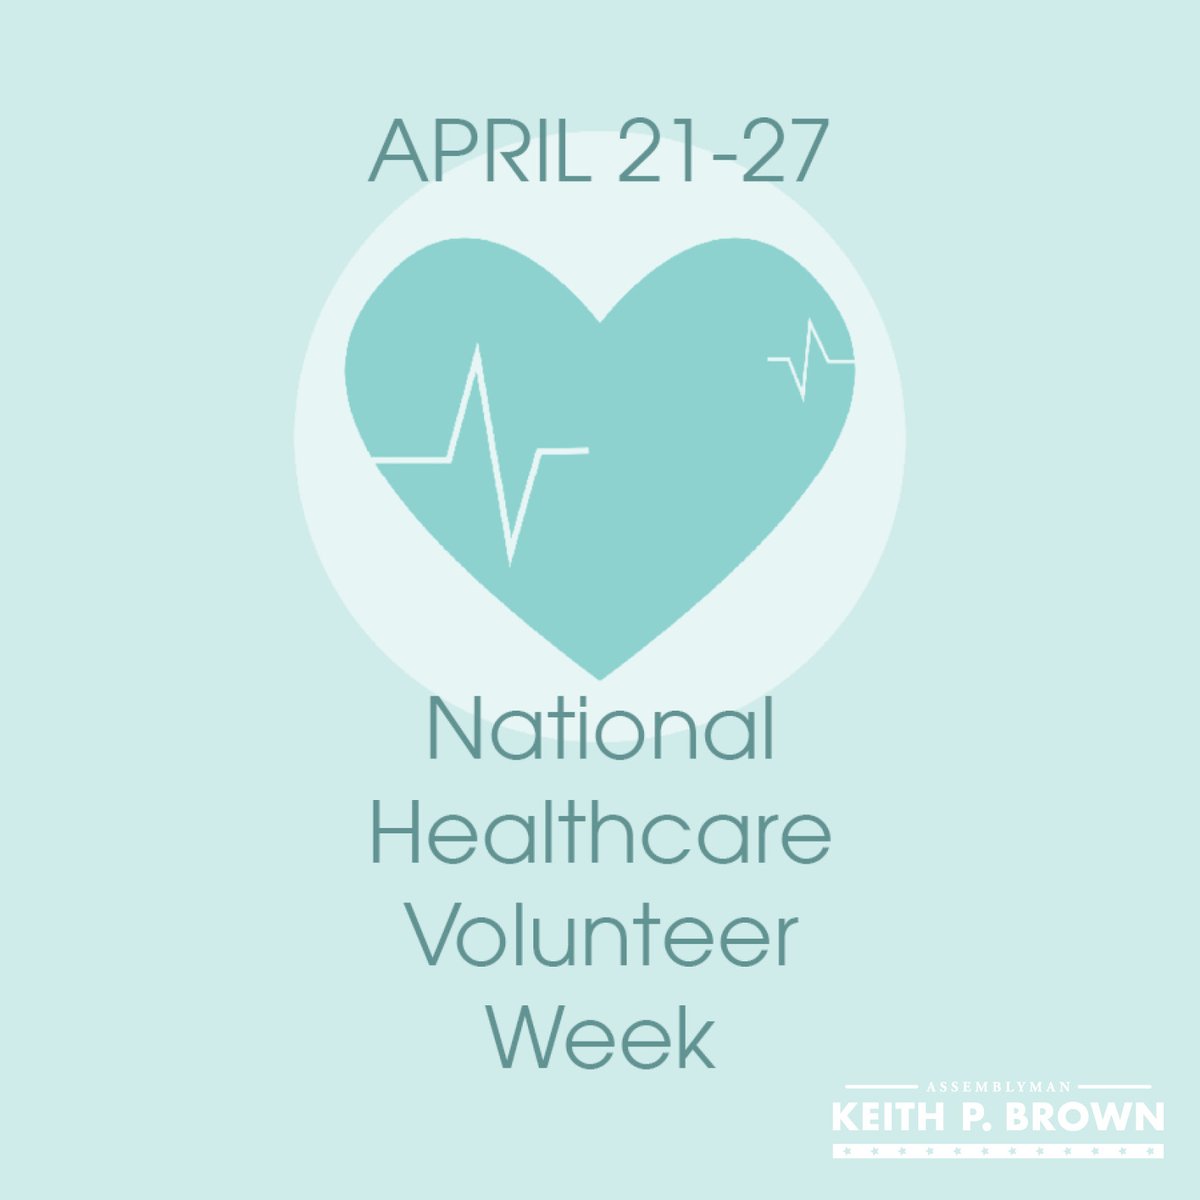 During the height of the COVID-19 pandemic, healthcare workers and volunteers answered the call knowing what they were up against. We thank you all during this National Healthcare Volunteer Week. #healthcare #Volunteers